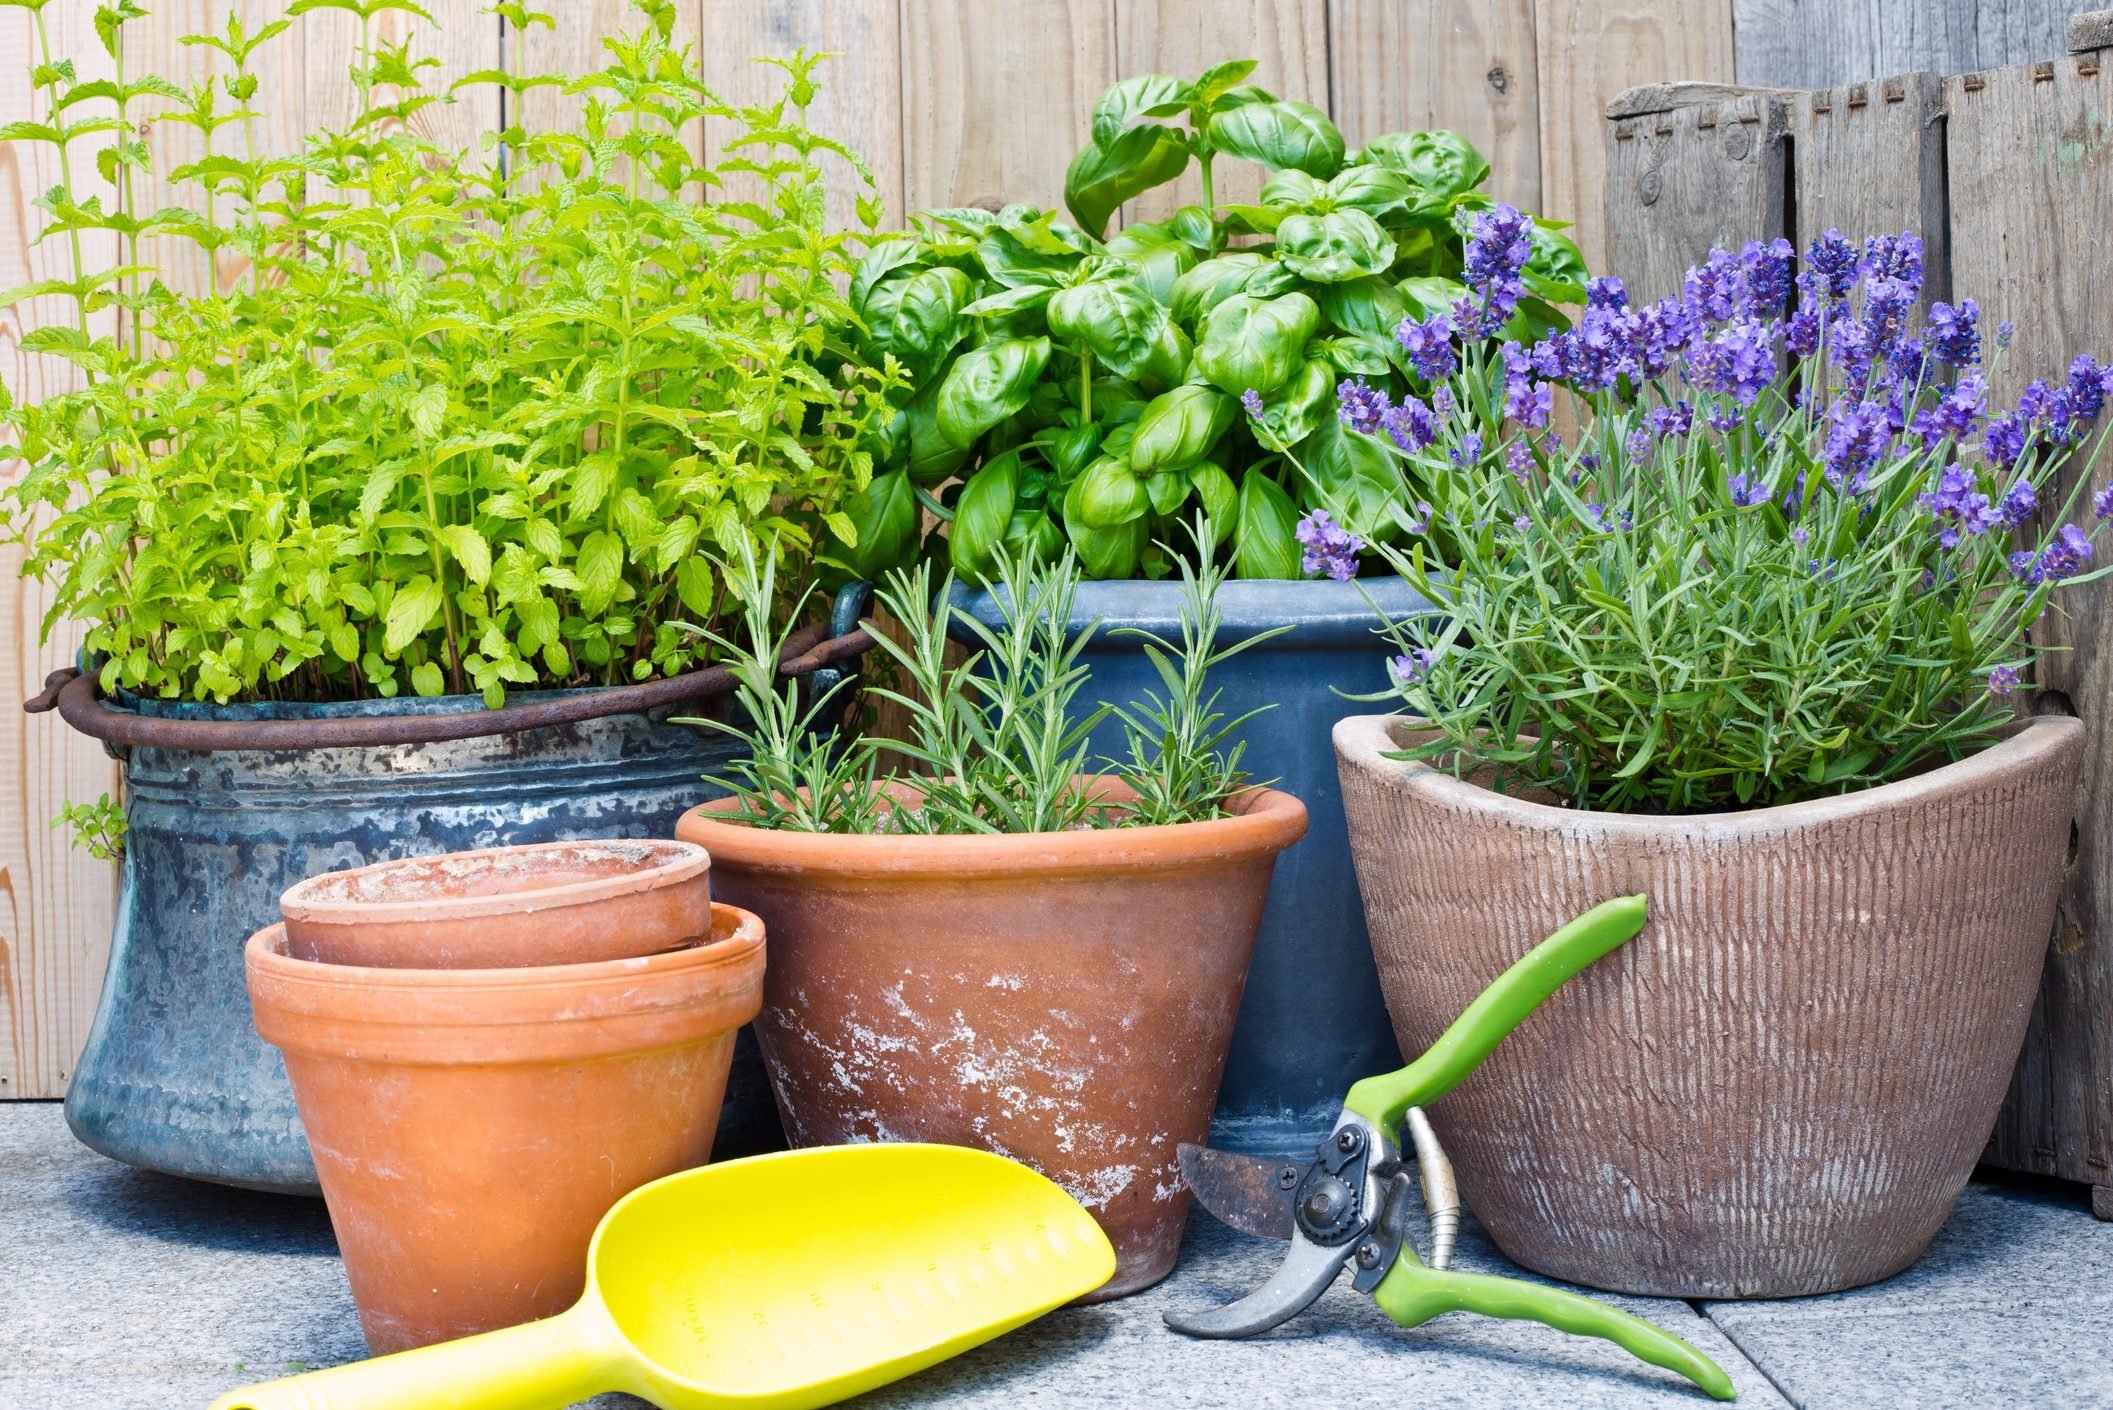 14 Plants That Repel Mosquitoes